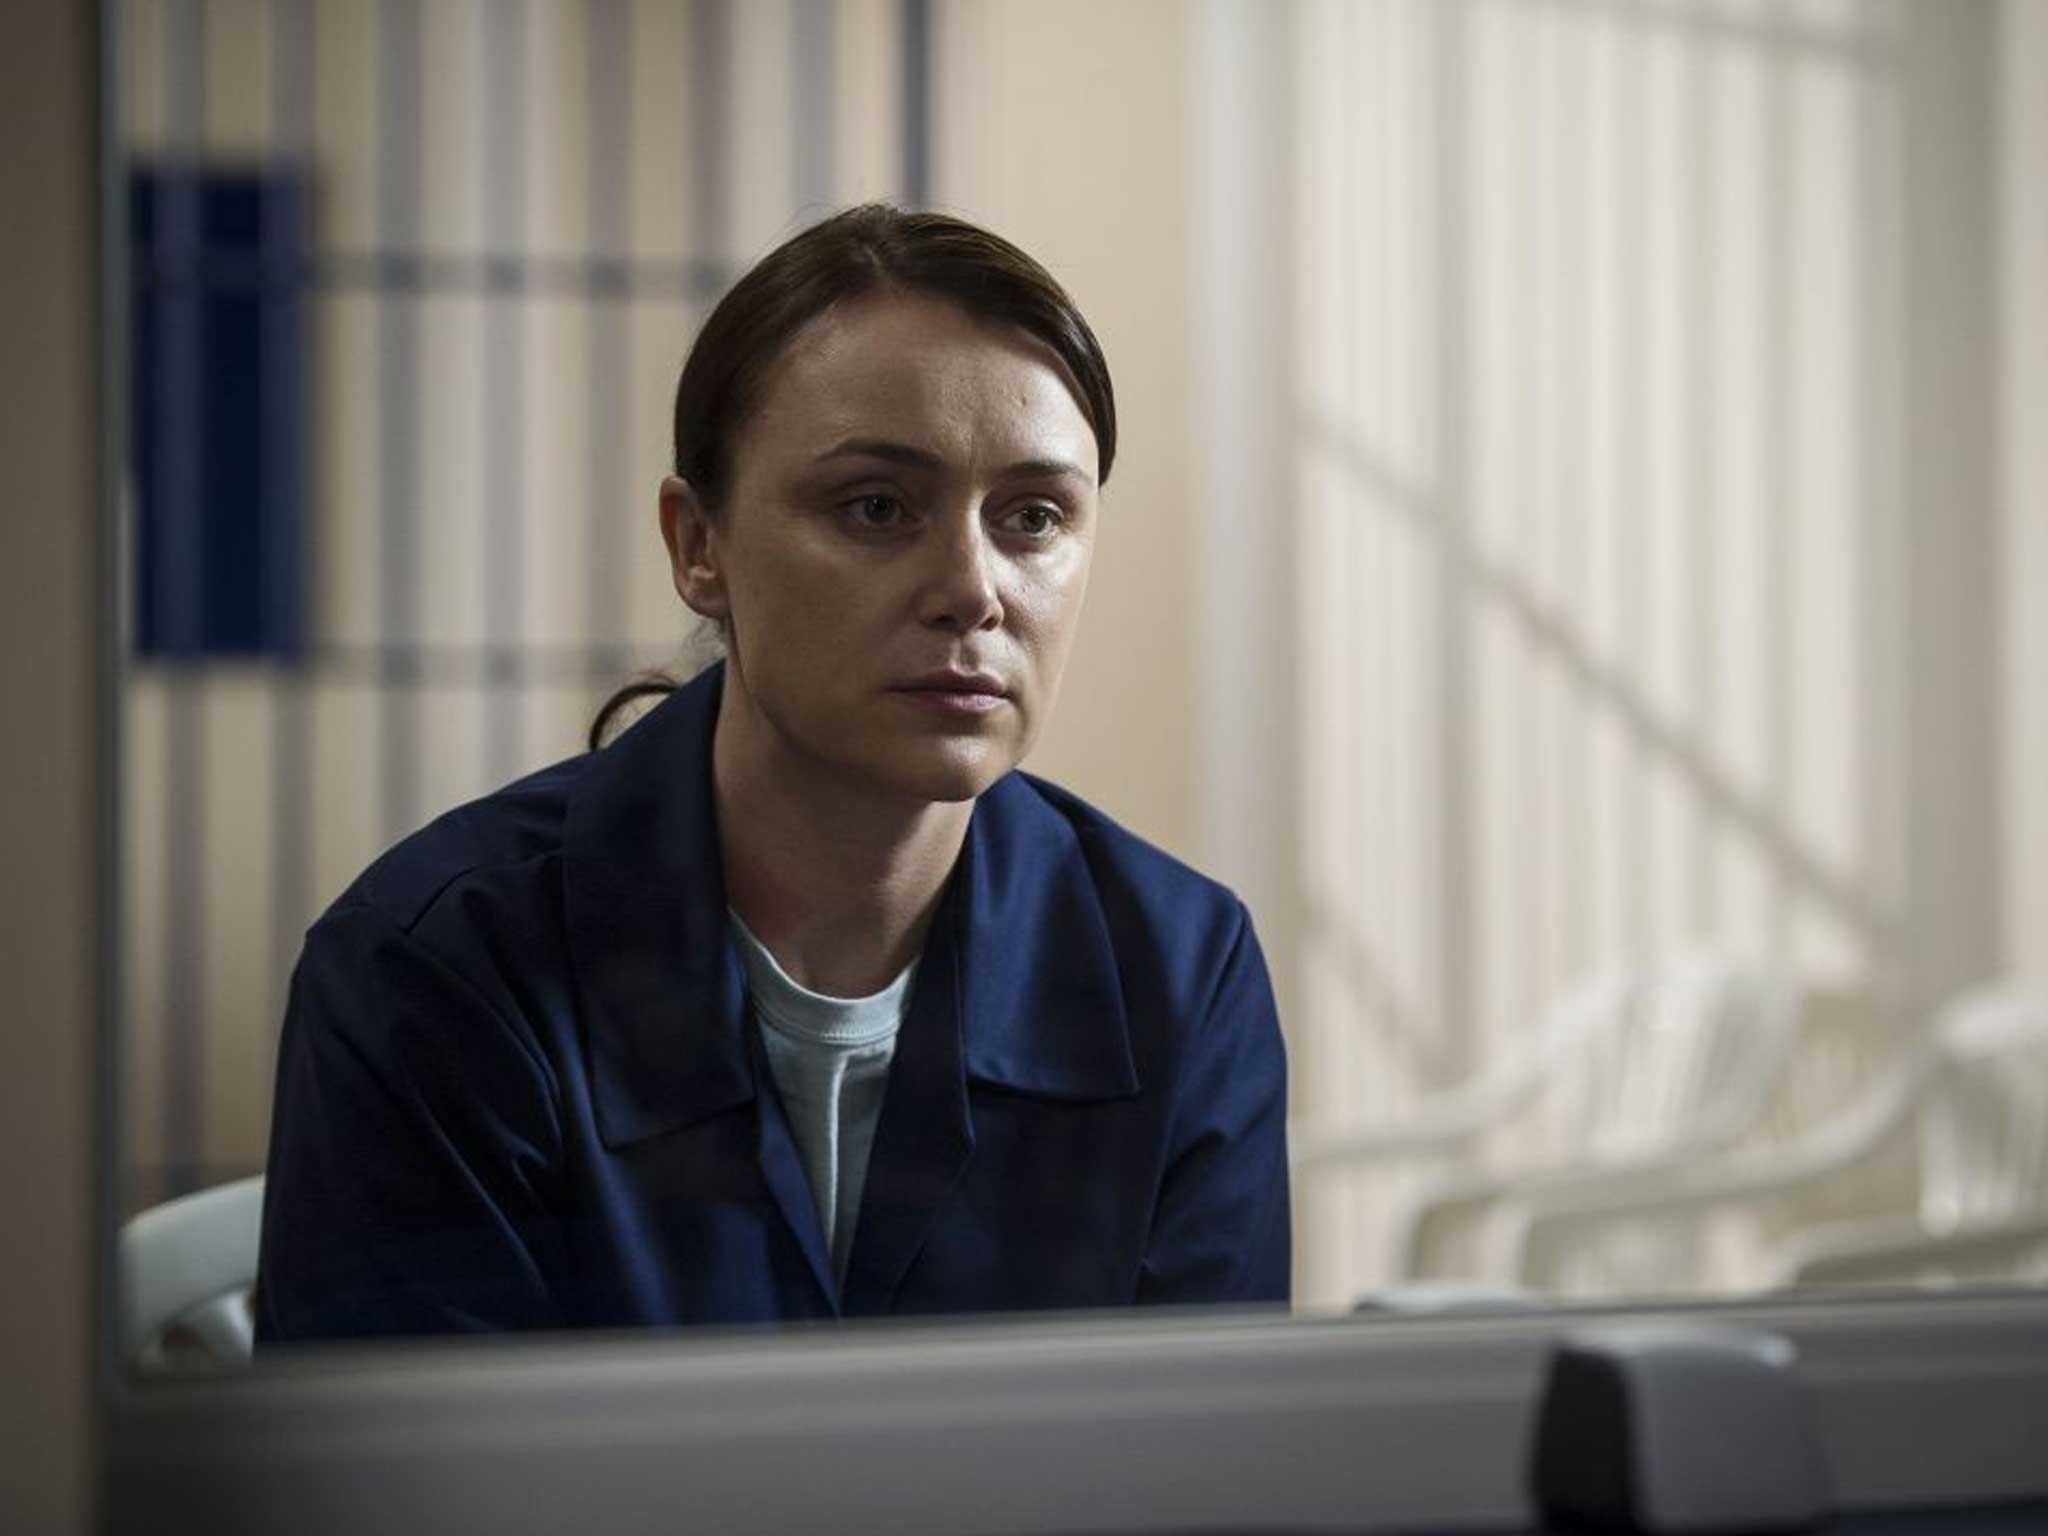 Steely keeley: Keeley Hawes stars as DI Lindsay Denton in the BBC’s cop corruption drama, Line of Duty